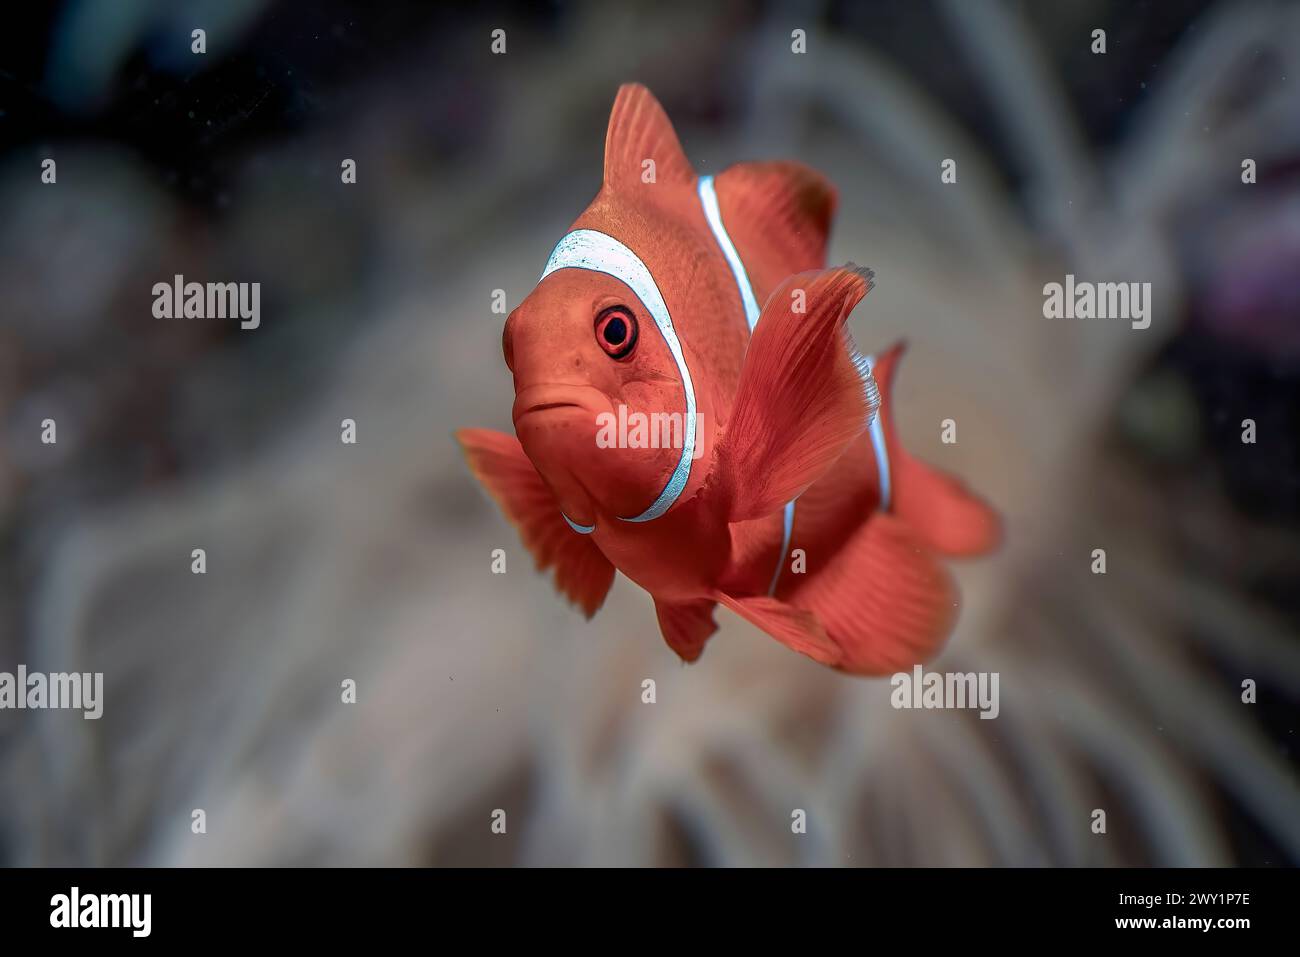 Clown fish swimming among the corals Stock Photo